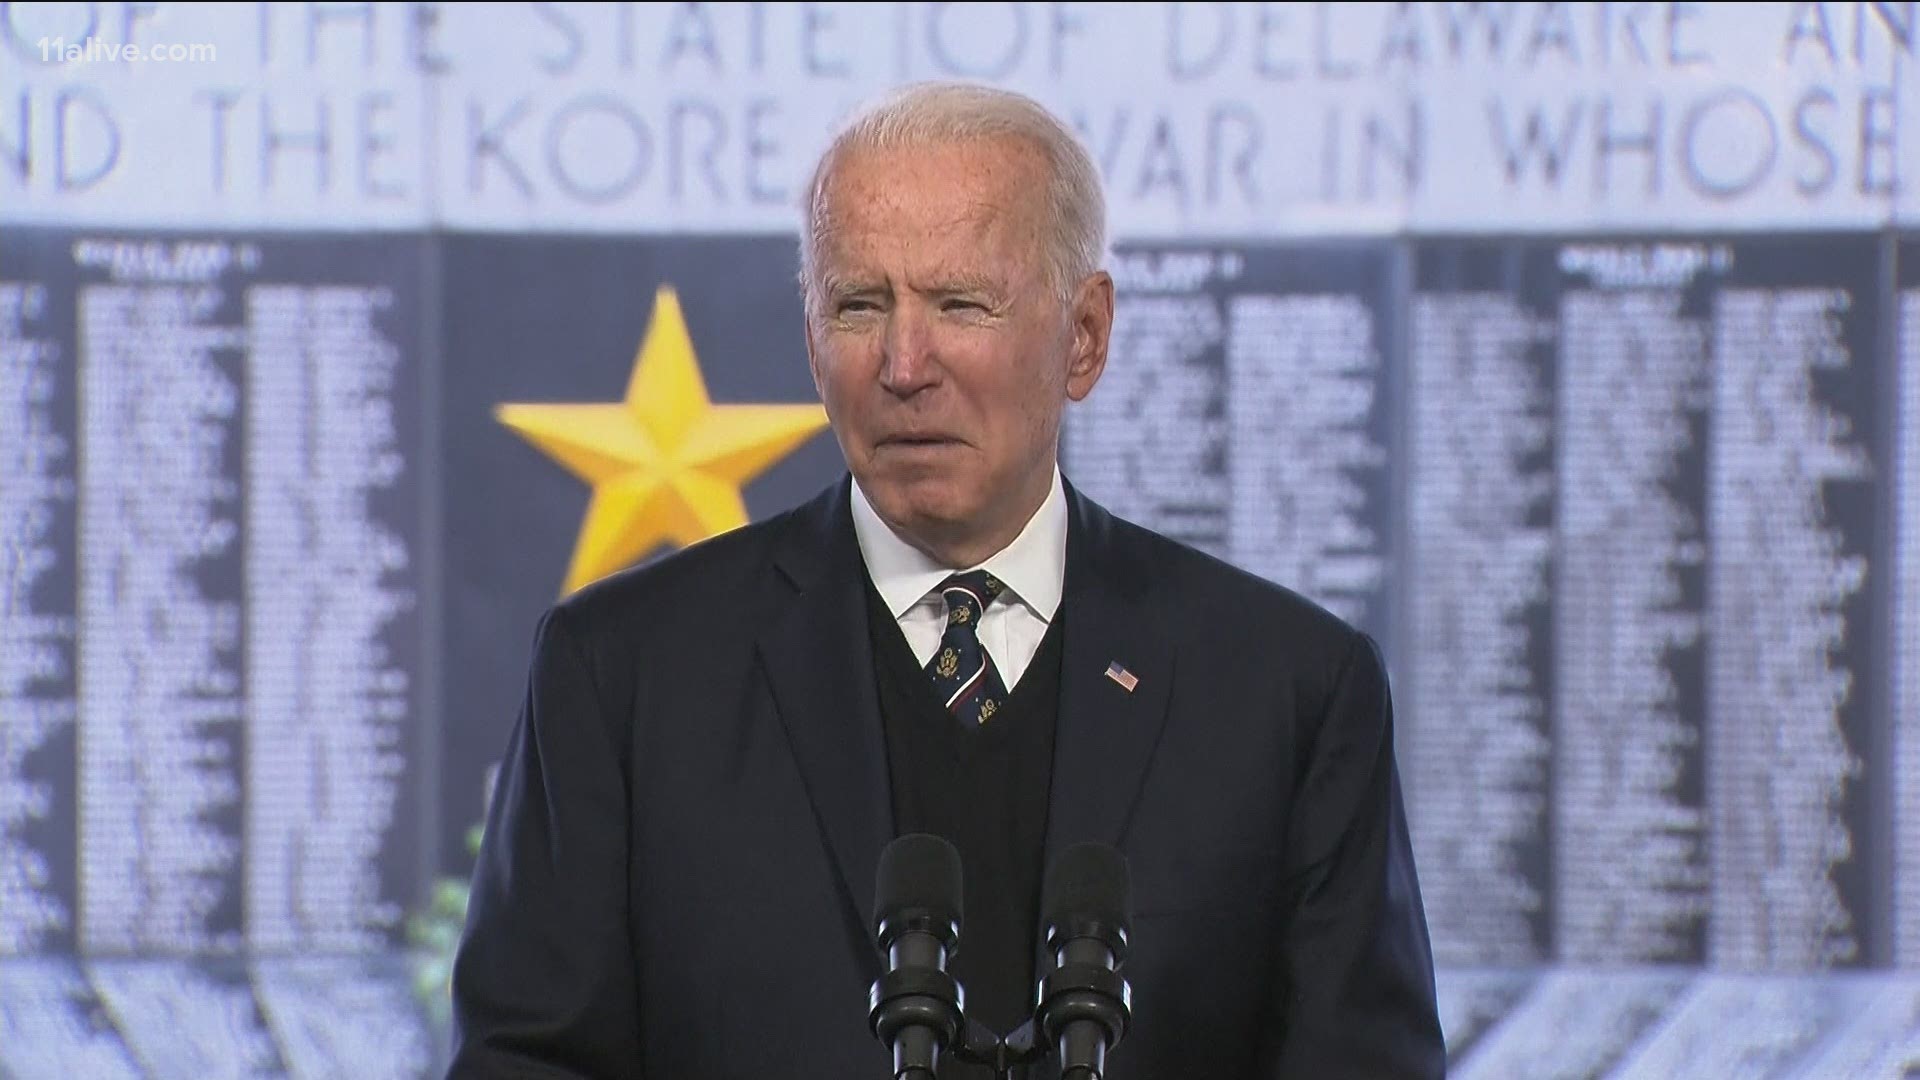 President Joe Biden and others around the nation will be marking the holiday with somber ceremonies on Monday.